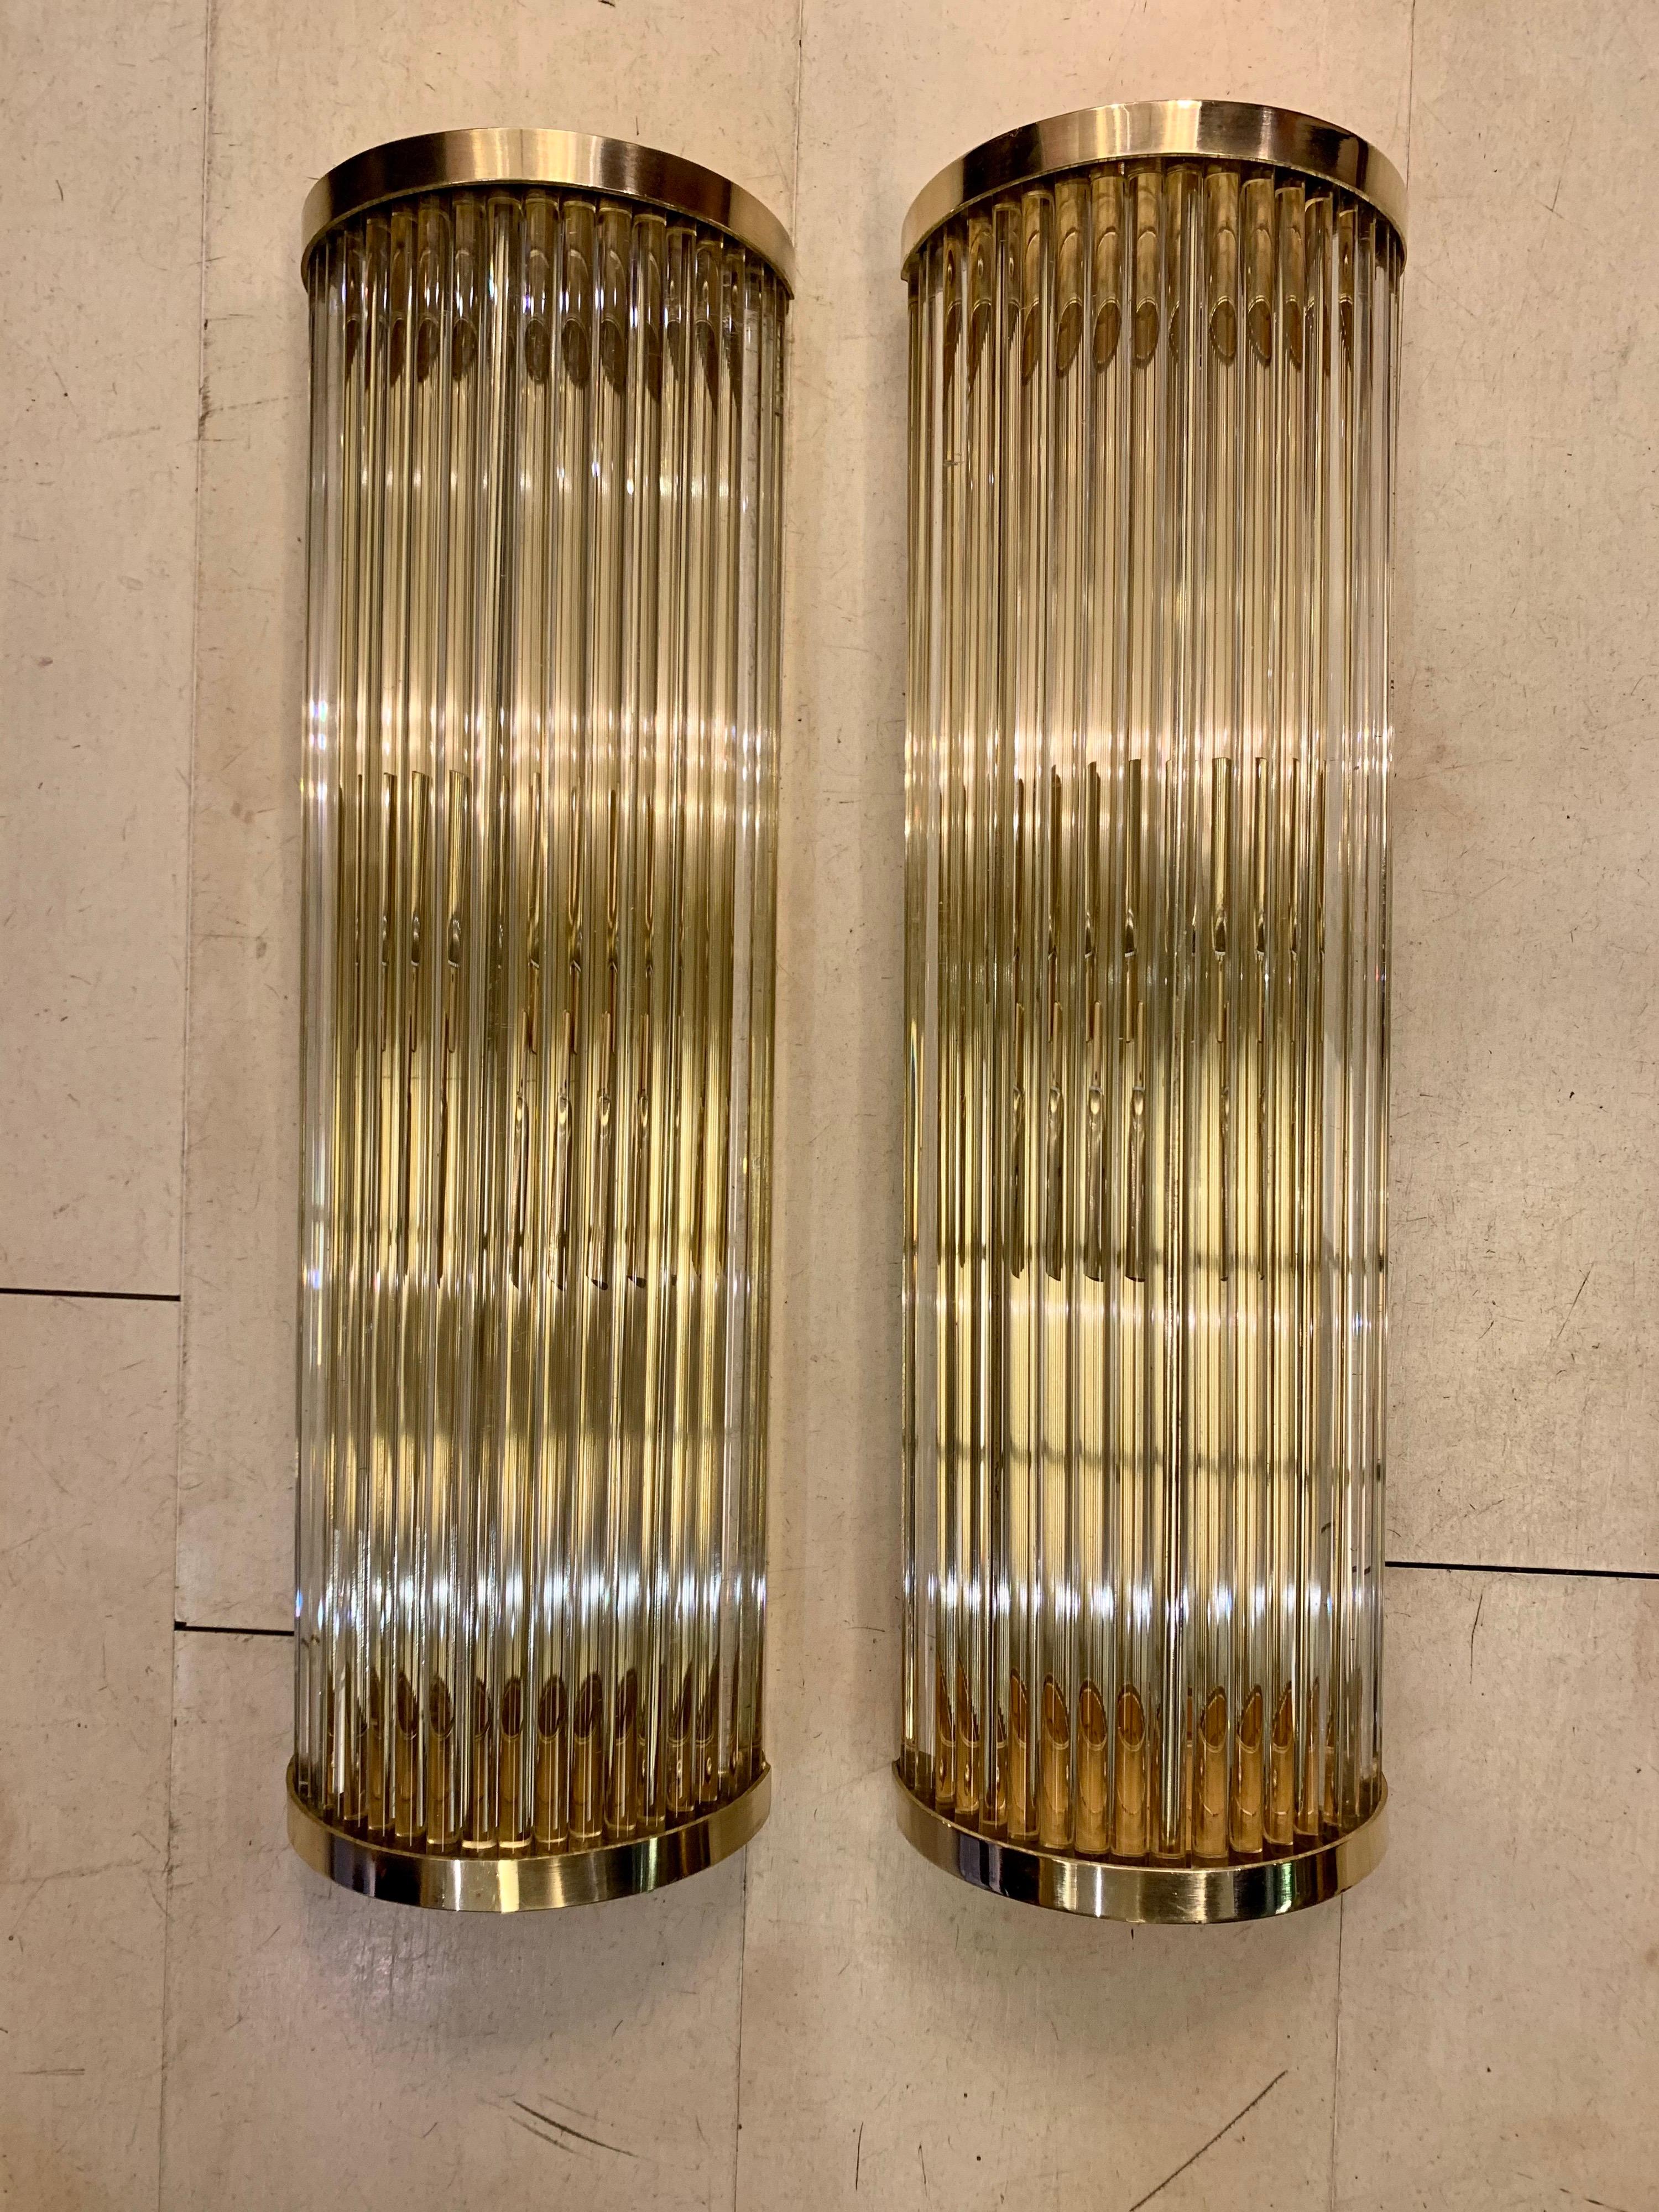 Pair of Murano clear glass wall sconces, round structure with hand blown transparent glass elements that are multiplying the light effect, brass structure. They can be positioned both horizontally and vertically, two bulbs per sconces, new